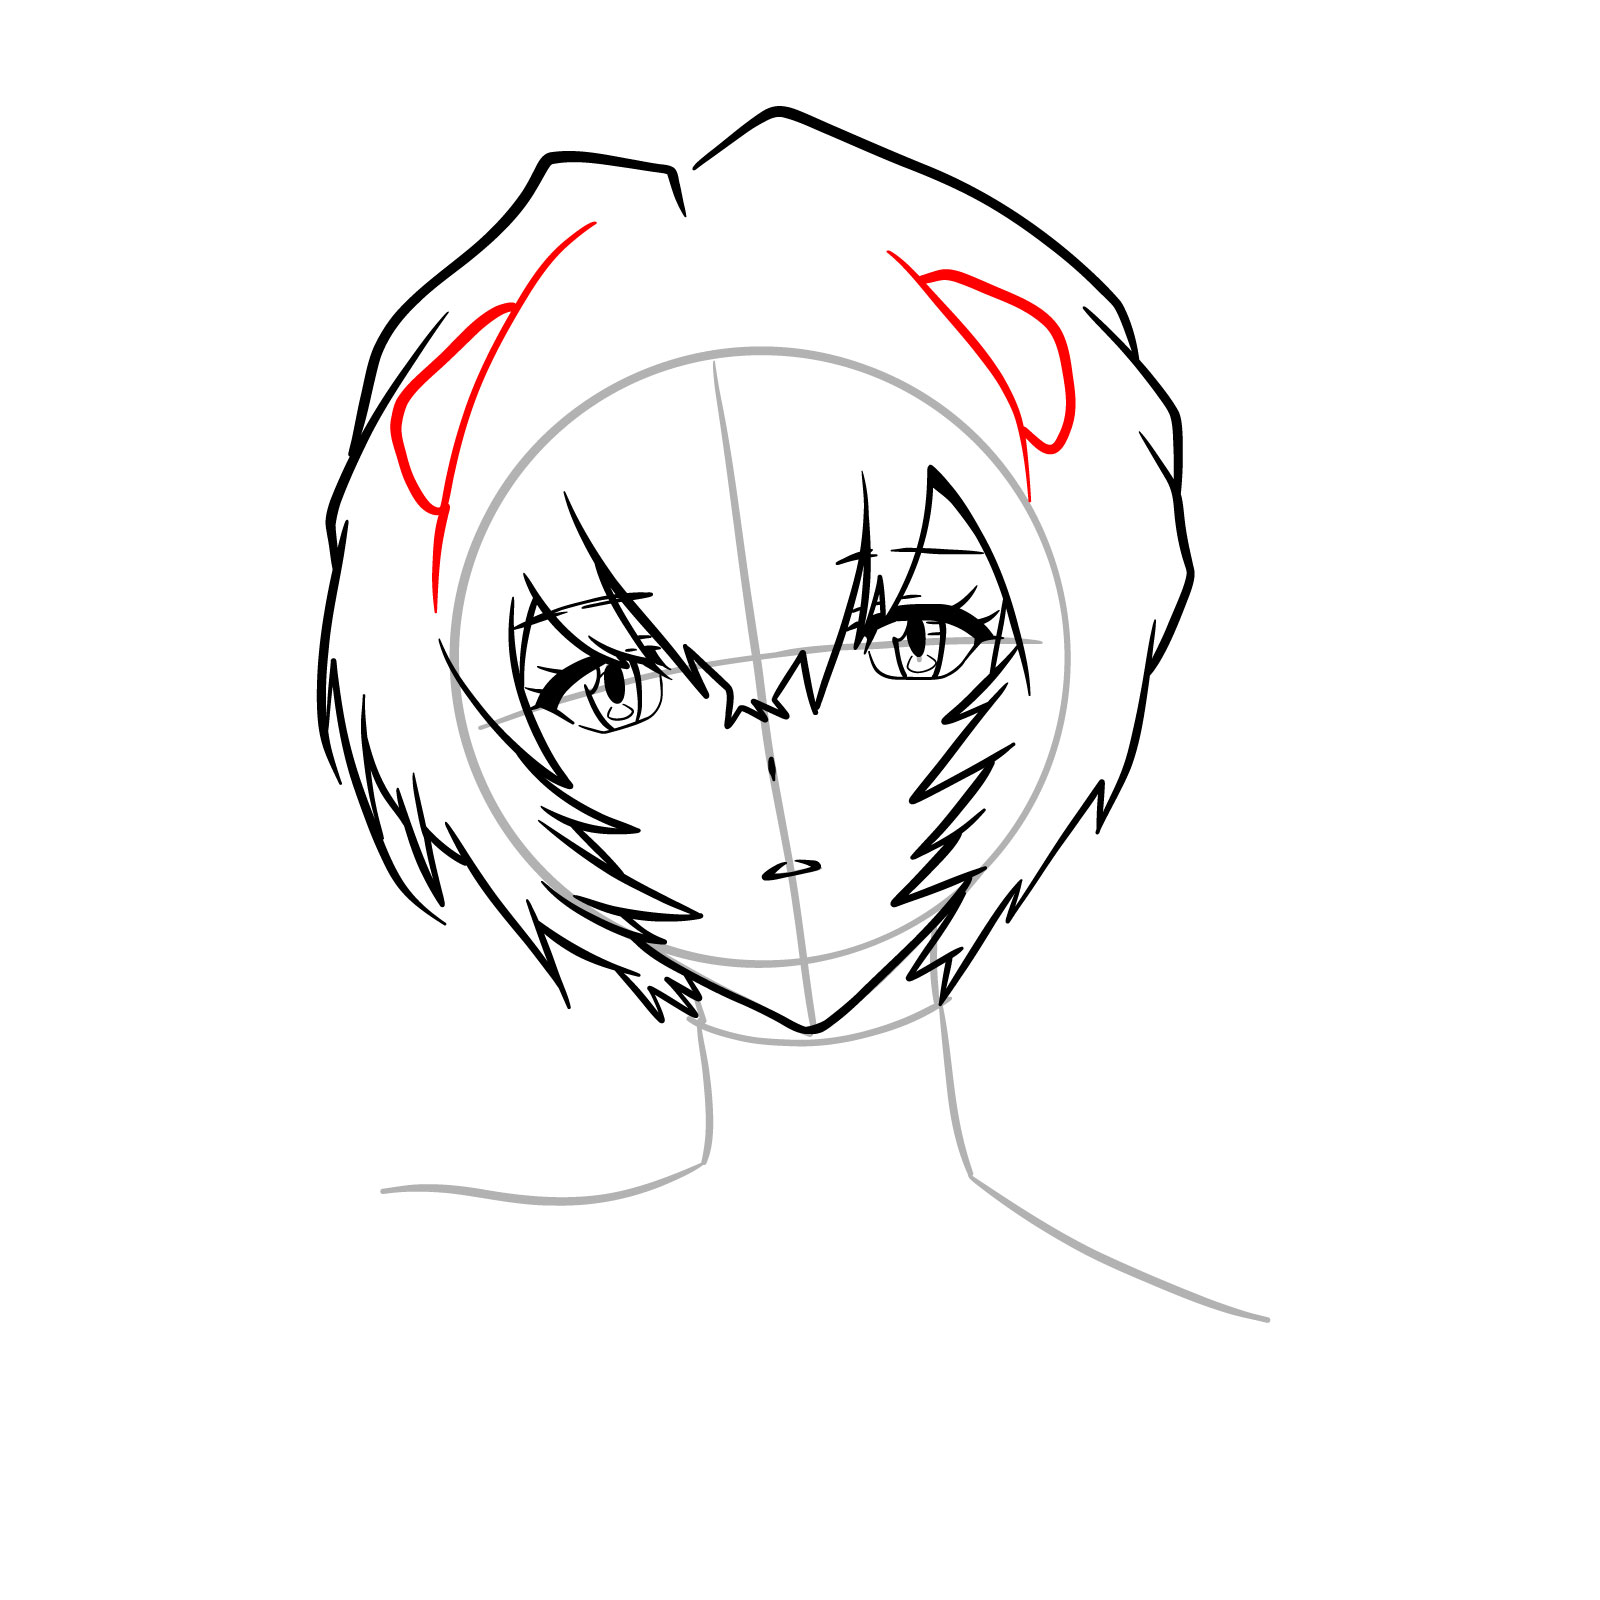 How to draw Rei Ayanami's face - Evangelion - step 14